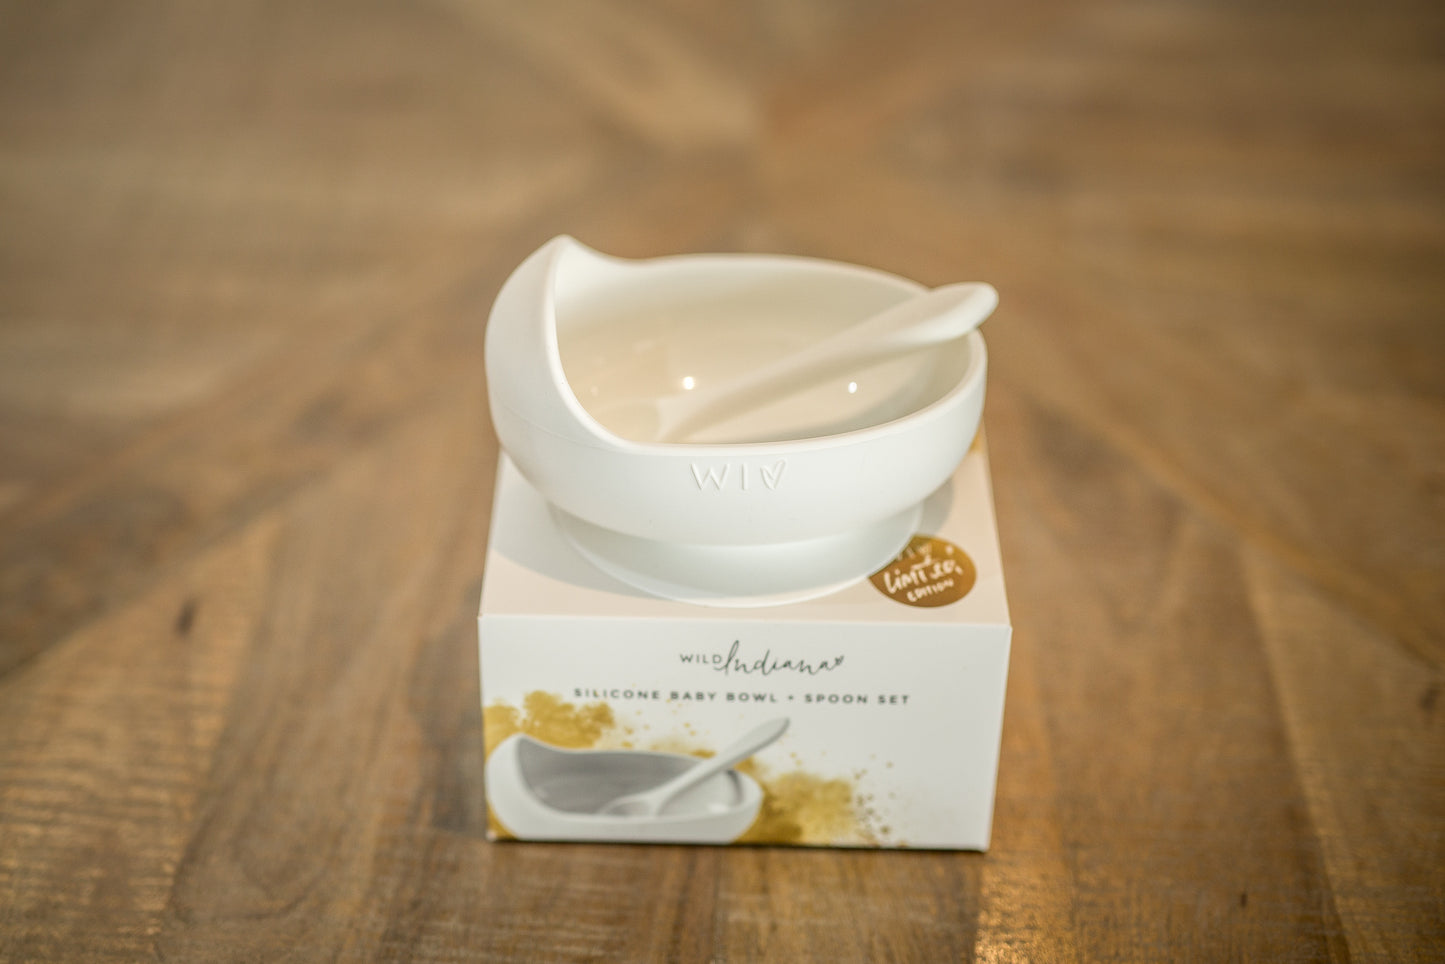 WILD INDIANA - LIMITED EDITION Silicone Bowl Set | SNOW